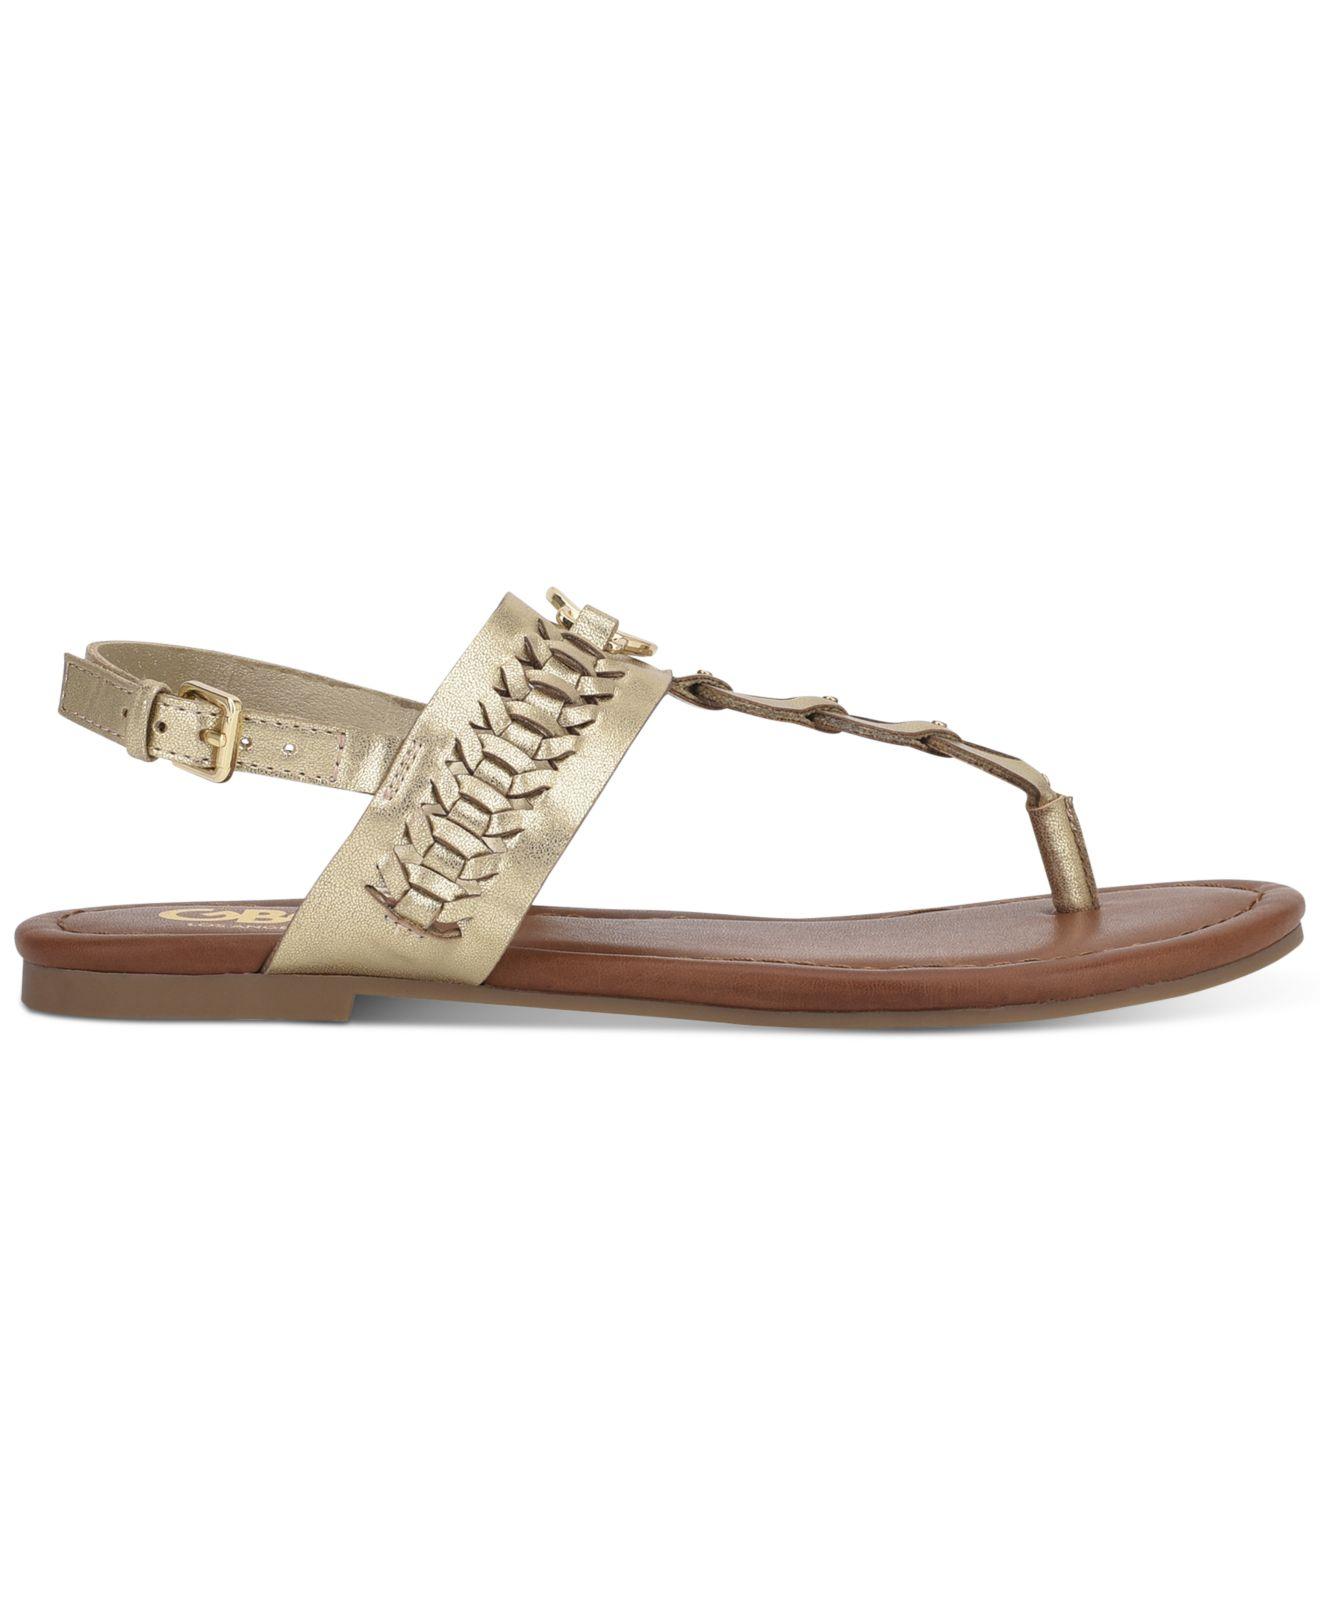 G by Guess Gbg Los Angeles Lovey Flat Sandals in Gold (Metallic) - Lyst